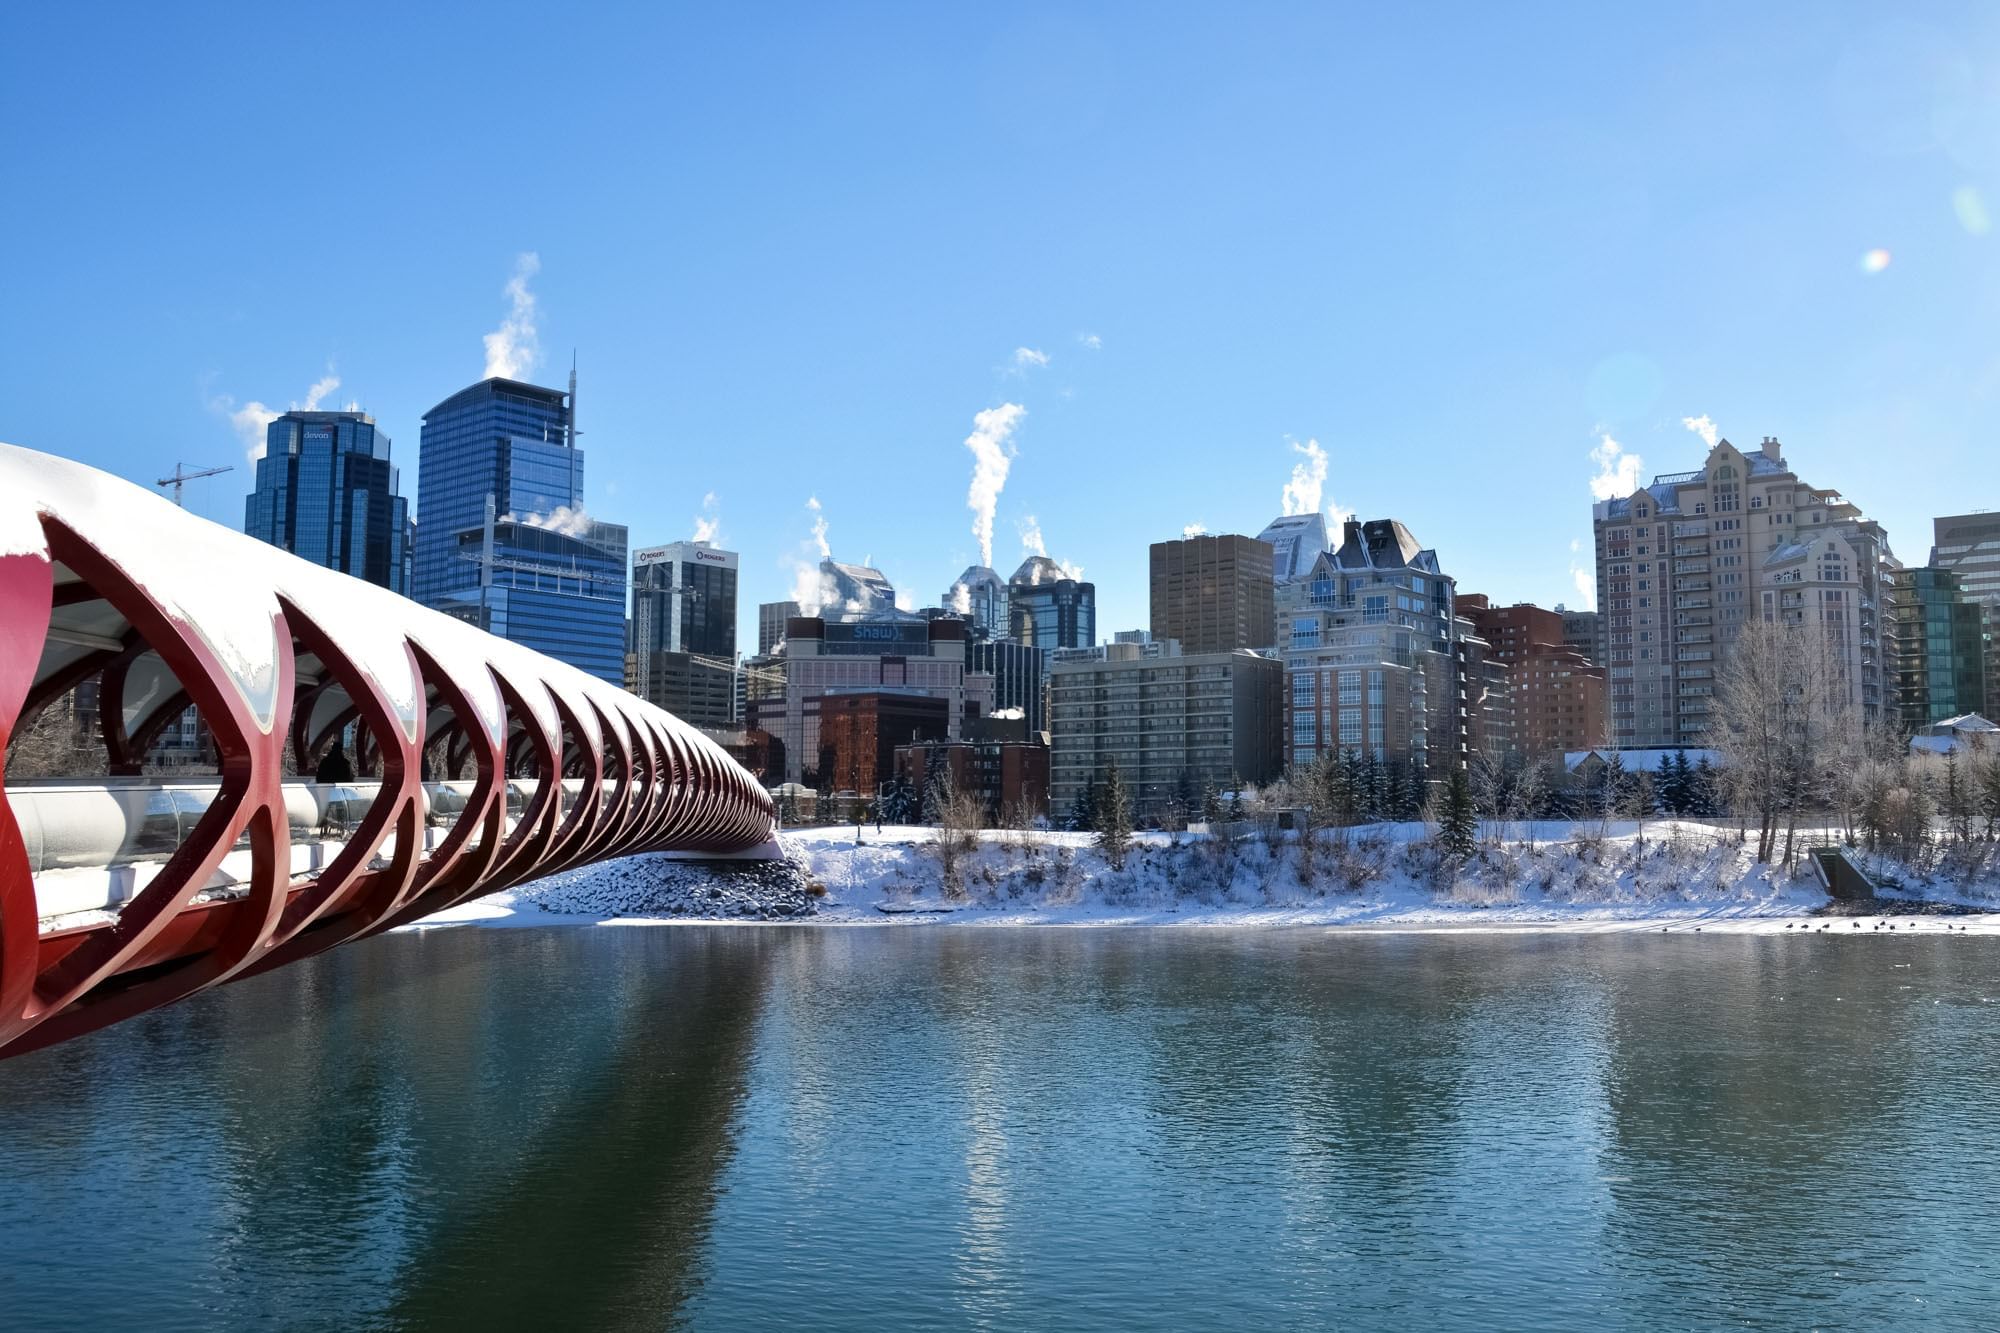 The perfect base to enjoy some winter activities in Calgary